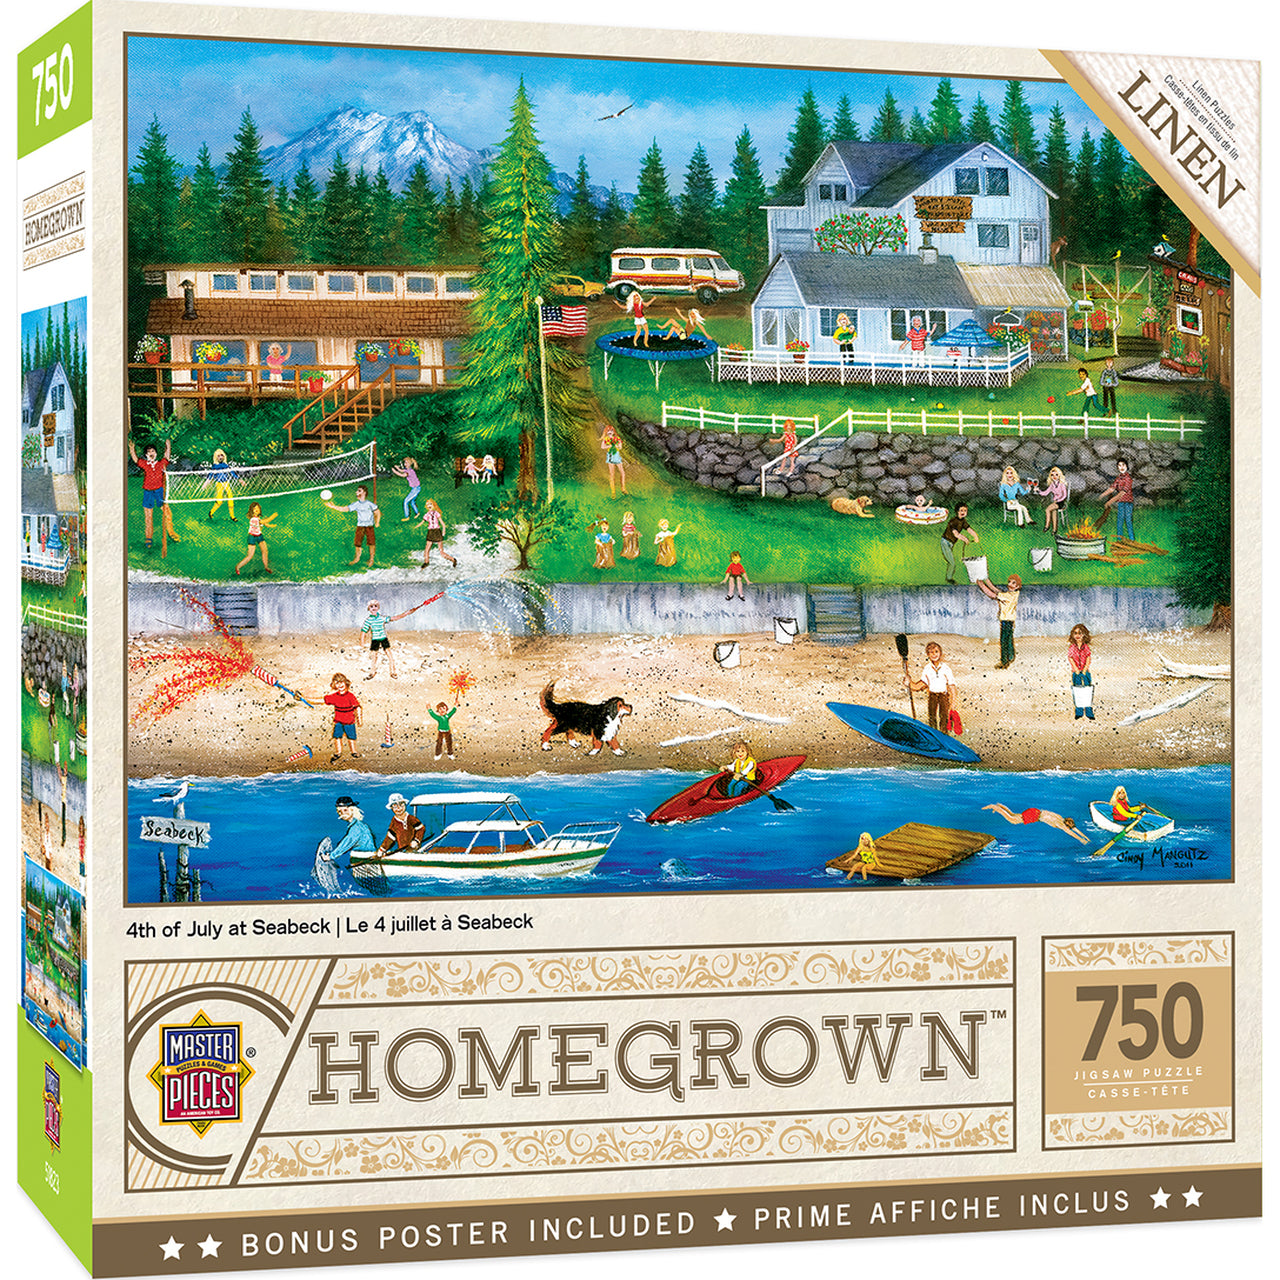 Homegrown - 4th of July at Seabeck 750 Piece Jigsaw Puzzle by Masterpieces